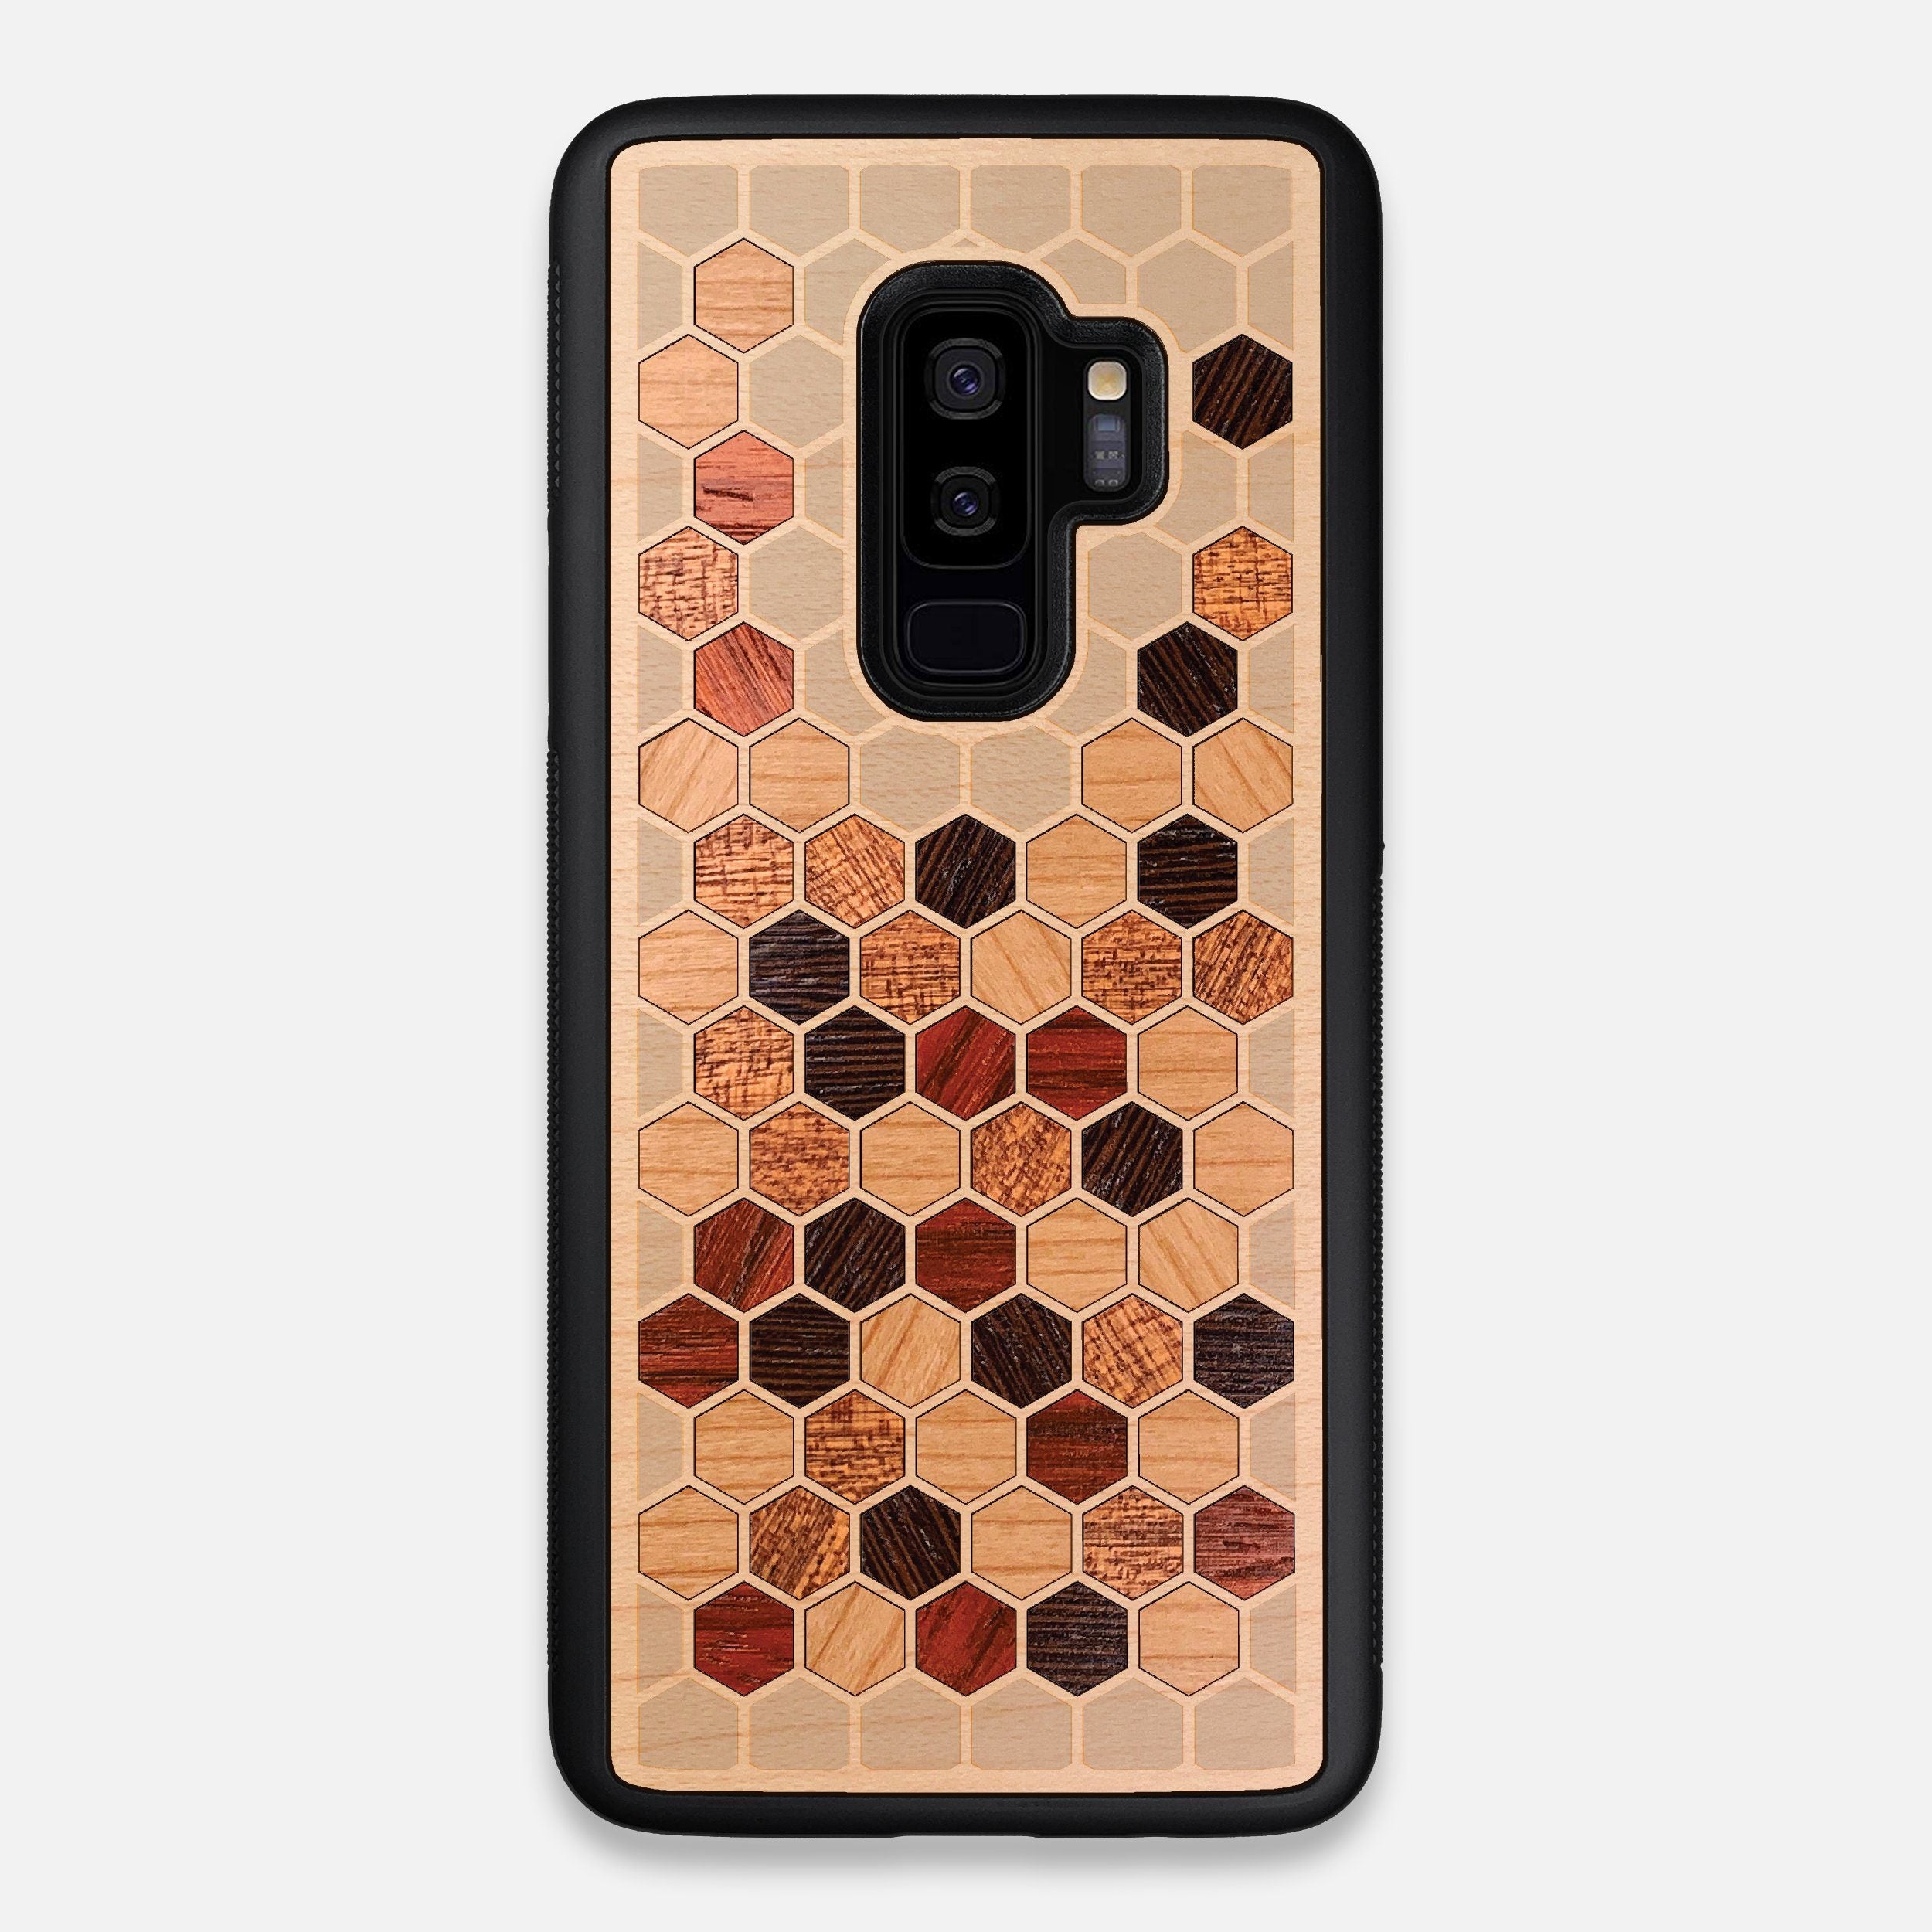 Front view of the Cellular Maple Wood Galaxy S9+ Case by Keyway Designs